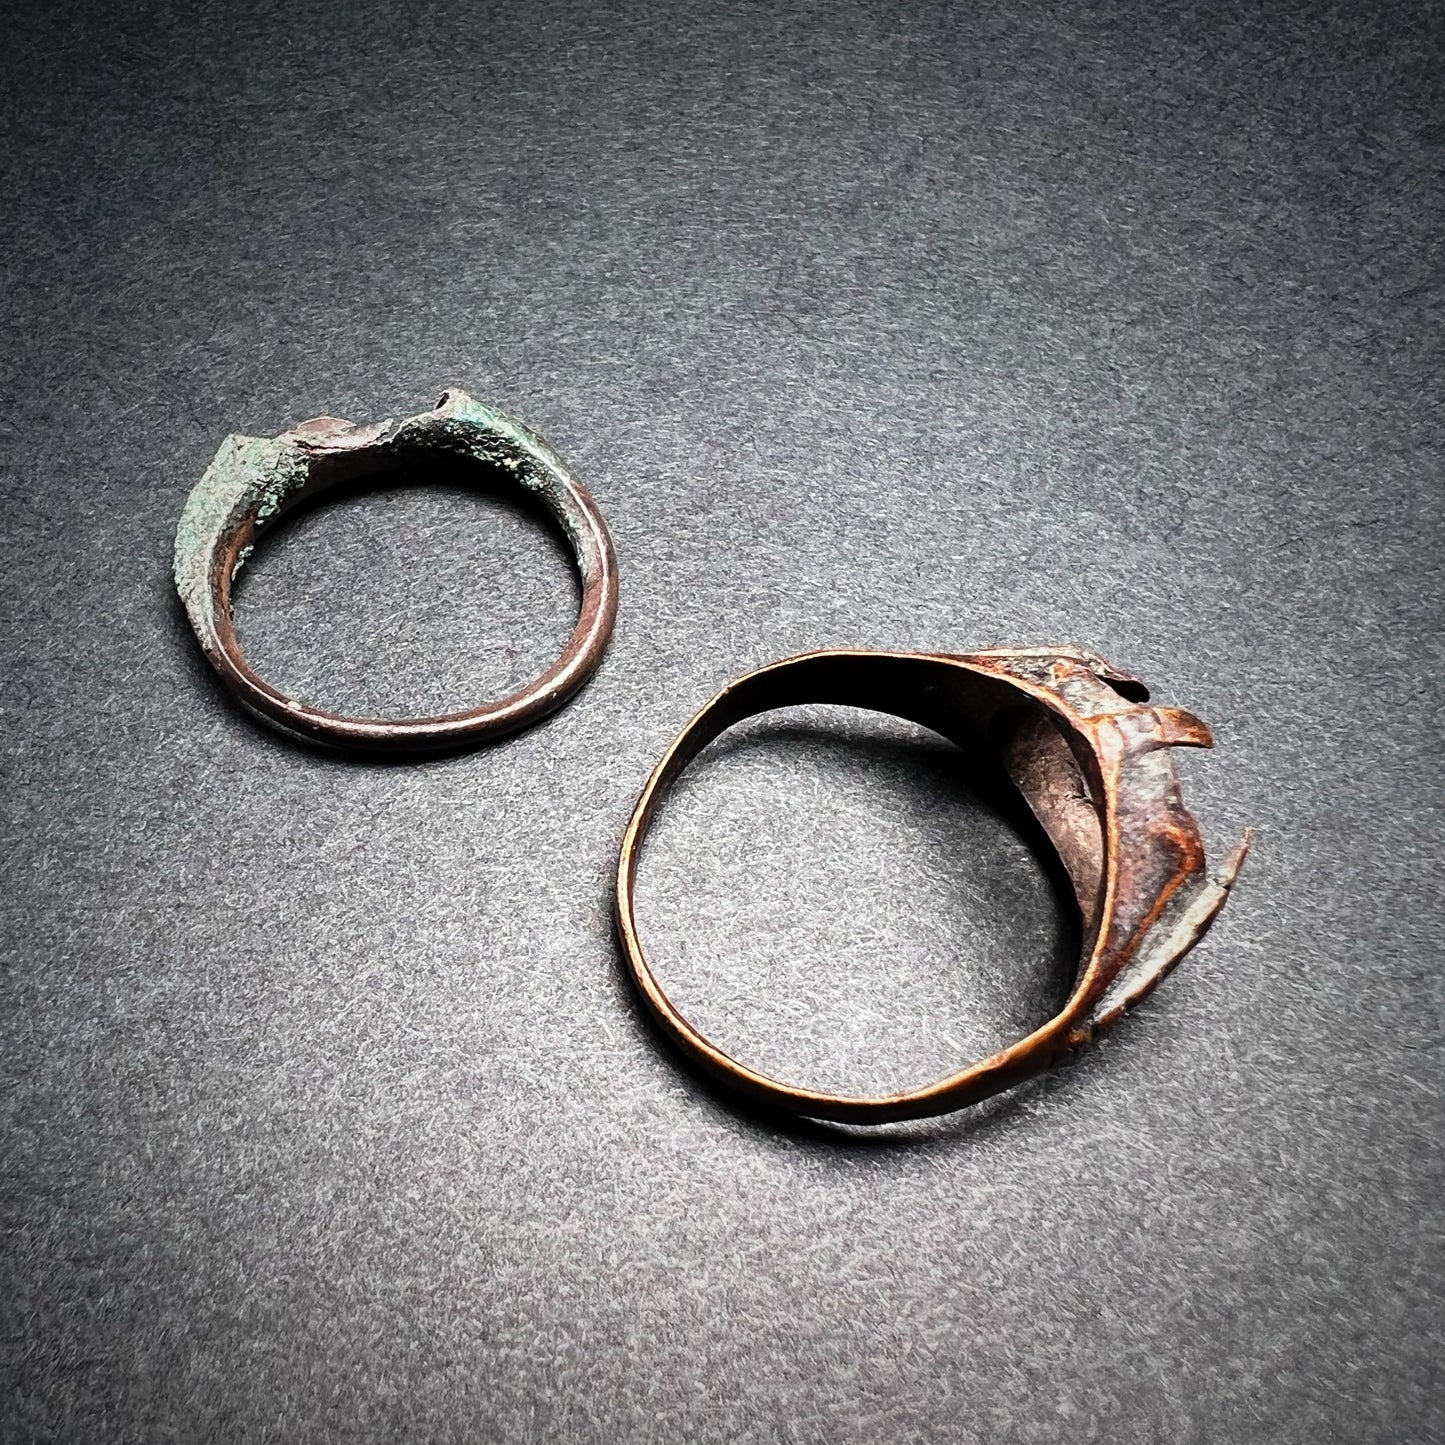 Medieval and Post-Medieval Bronze Finger Rings